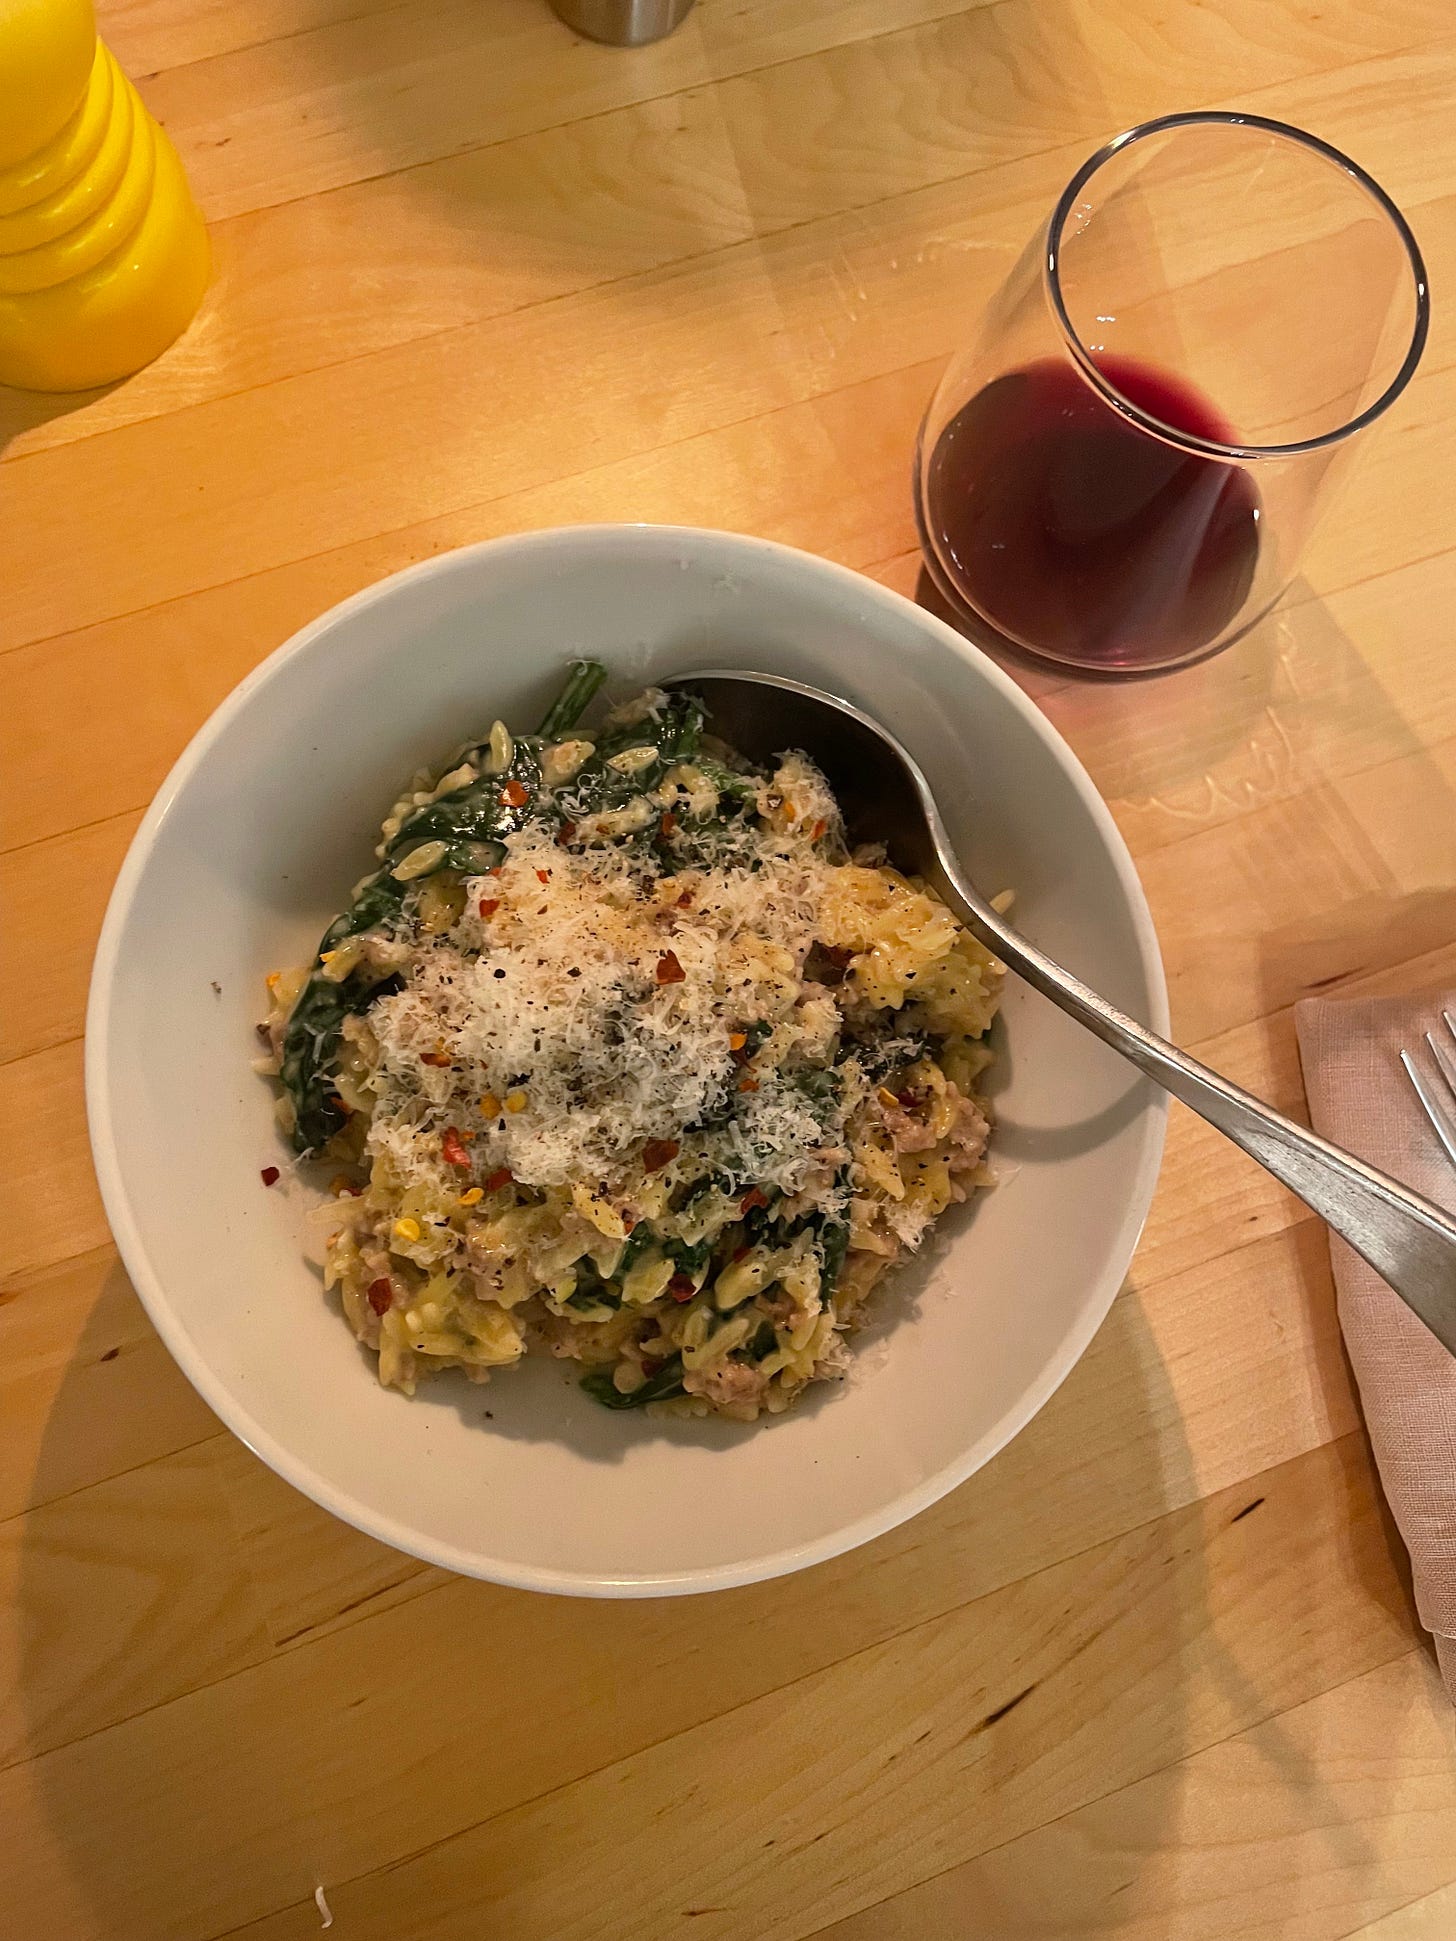 A bowl of creamy sausage orzo with spinach, freshly grated Parmesan cheese and plenty of chilli flakes. Enjoyed with red wine at the end of a sunny and busy spring day.